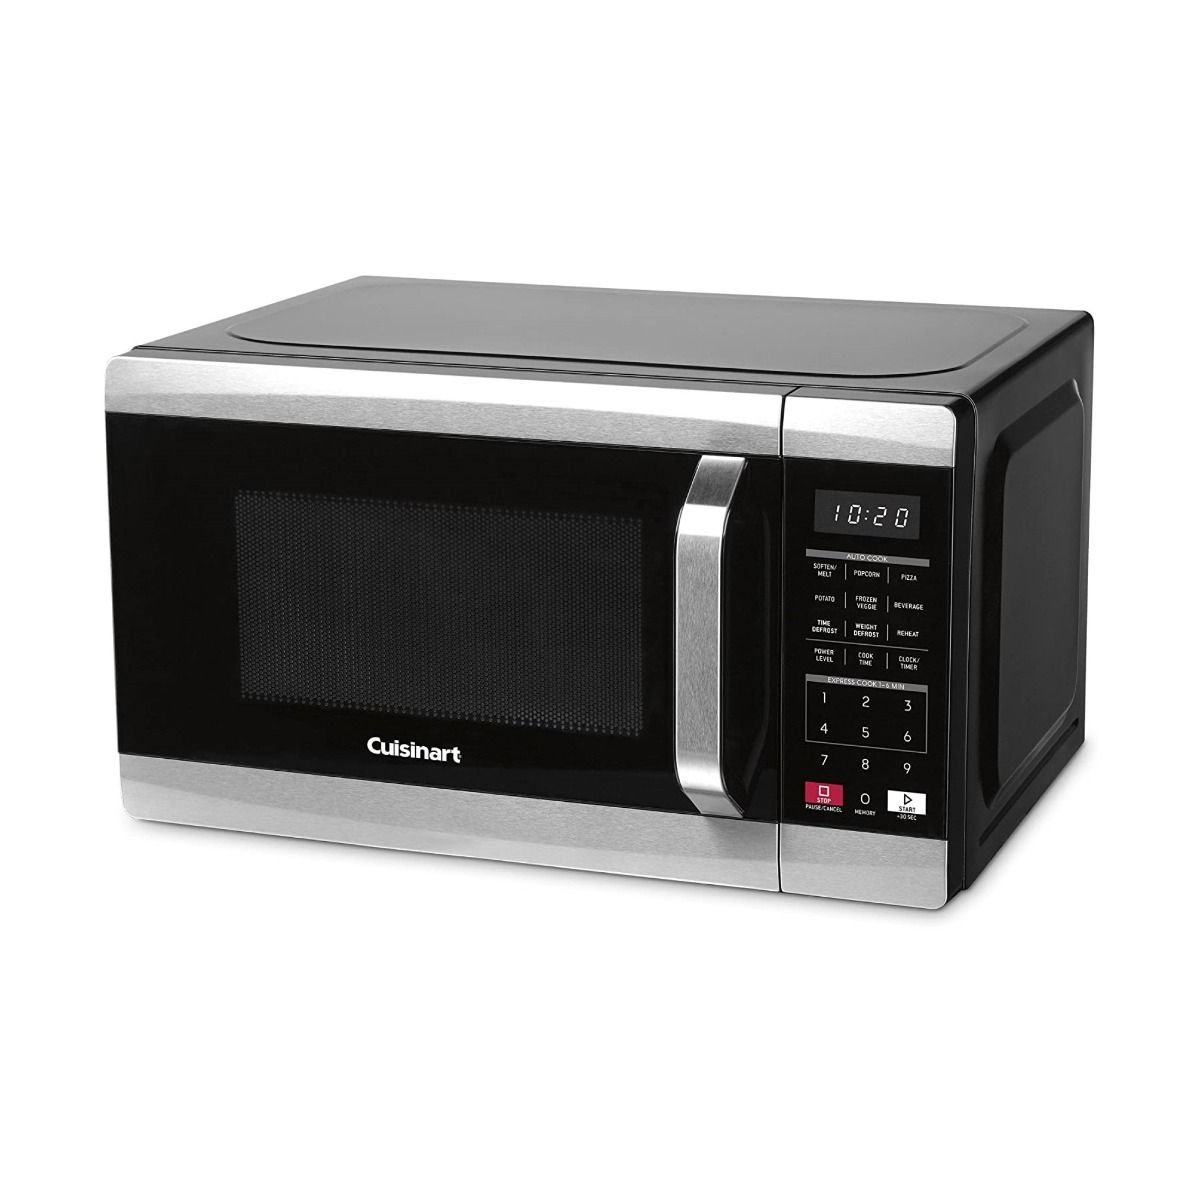 Small Black Microwave Cheap Microwave Oven 700W Power For Kitchen US